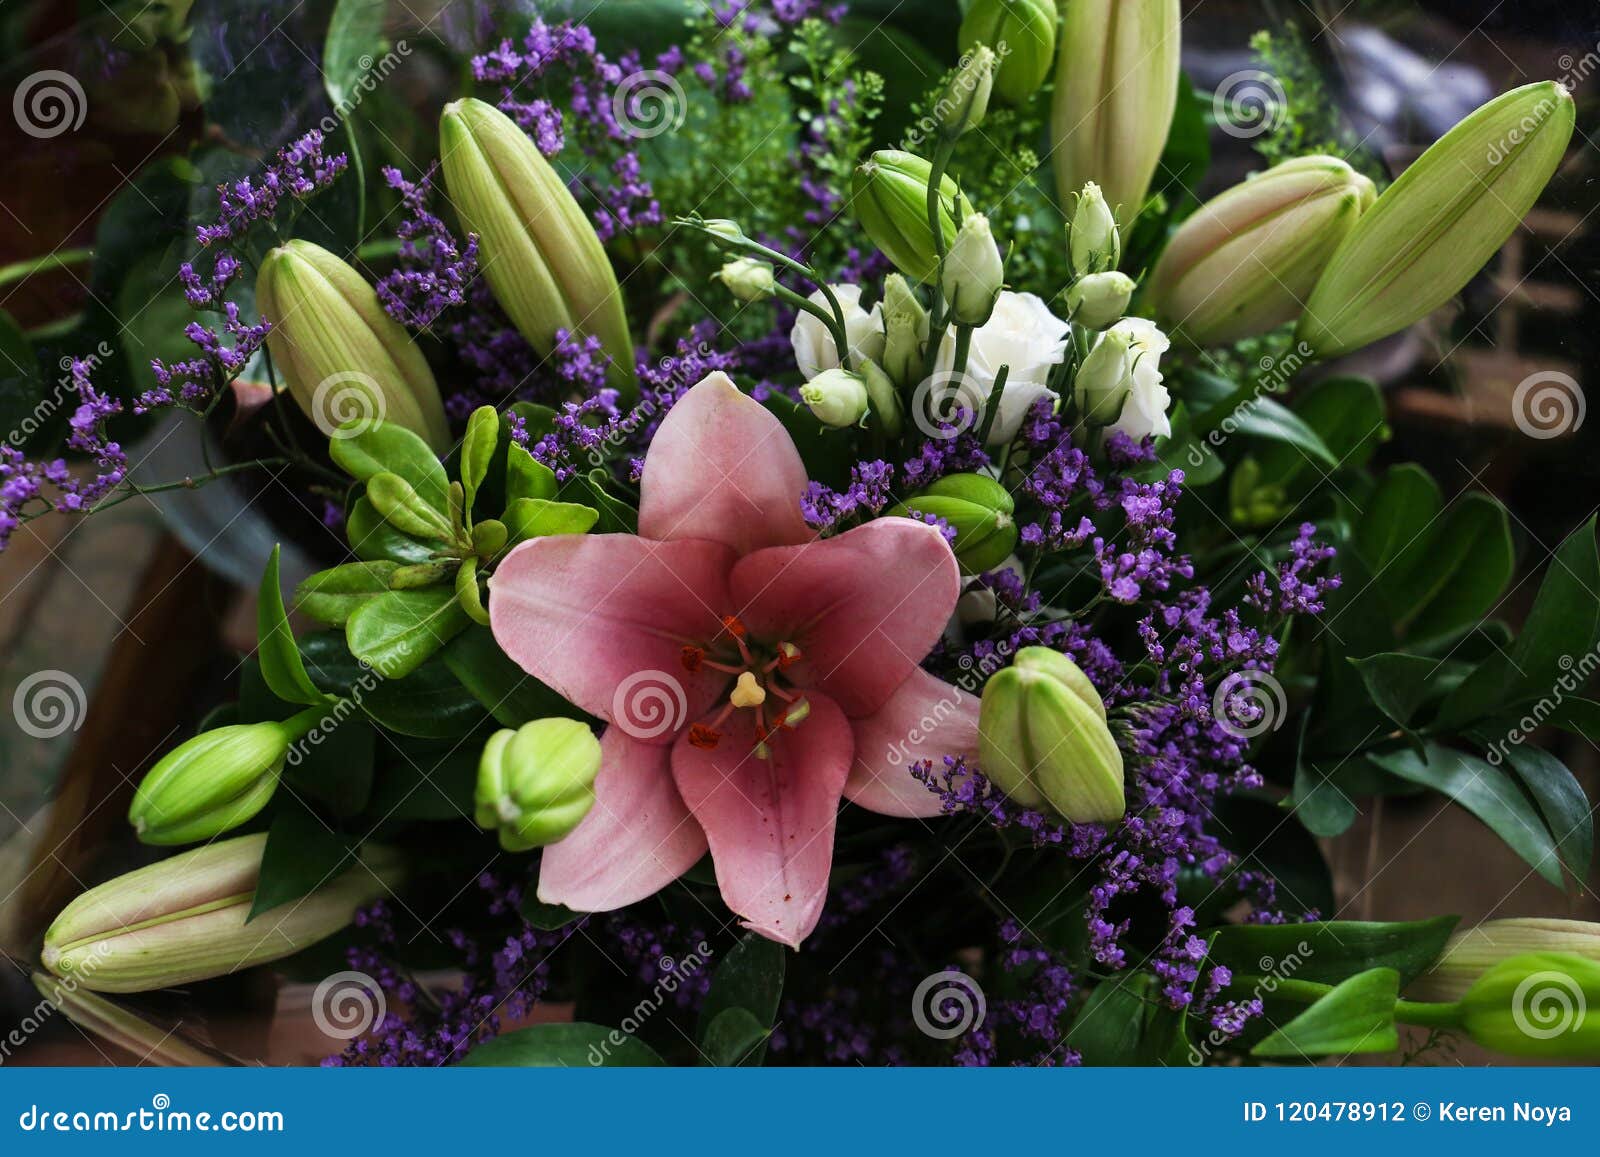 A Lovely Beautiful Bouquet Consisting of Pink Lilies Stock Photo ...